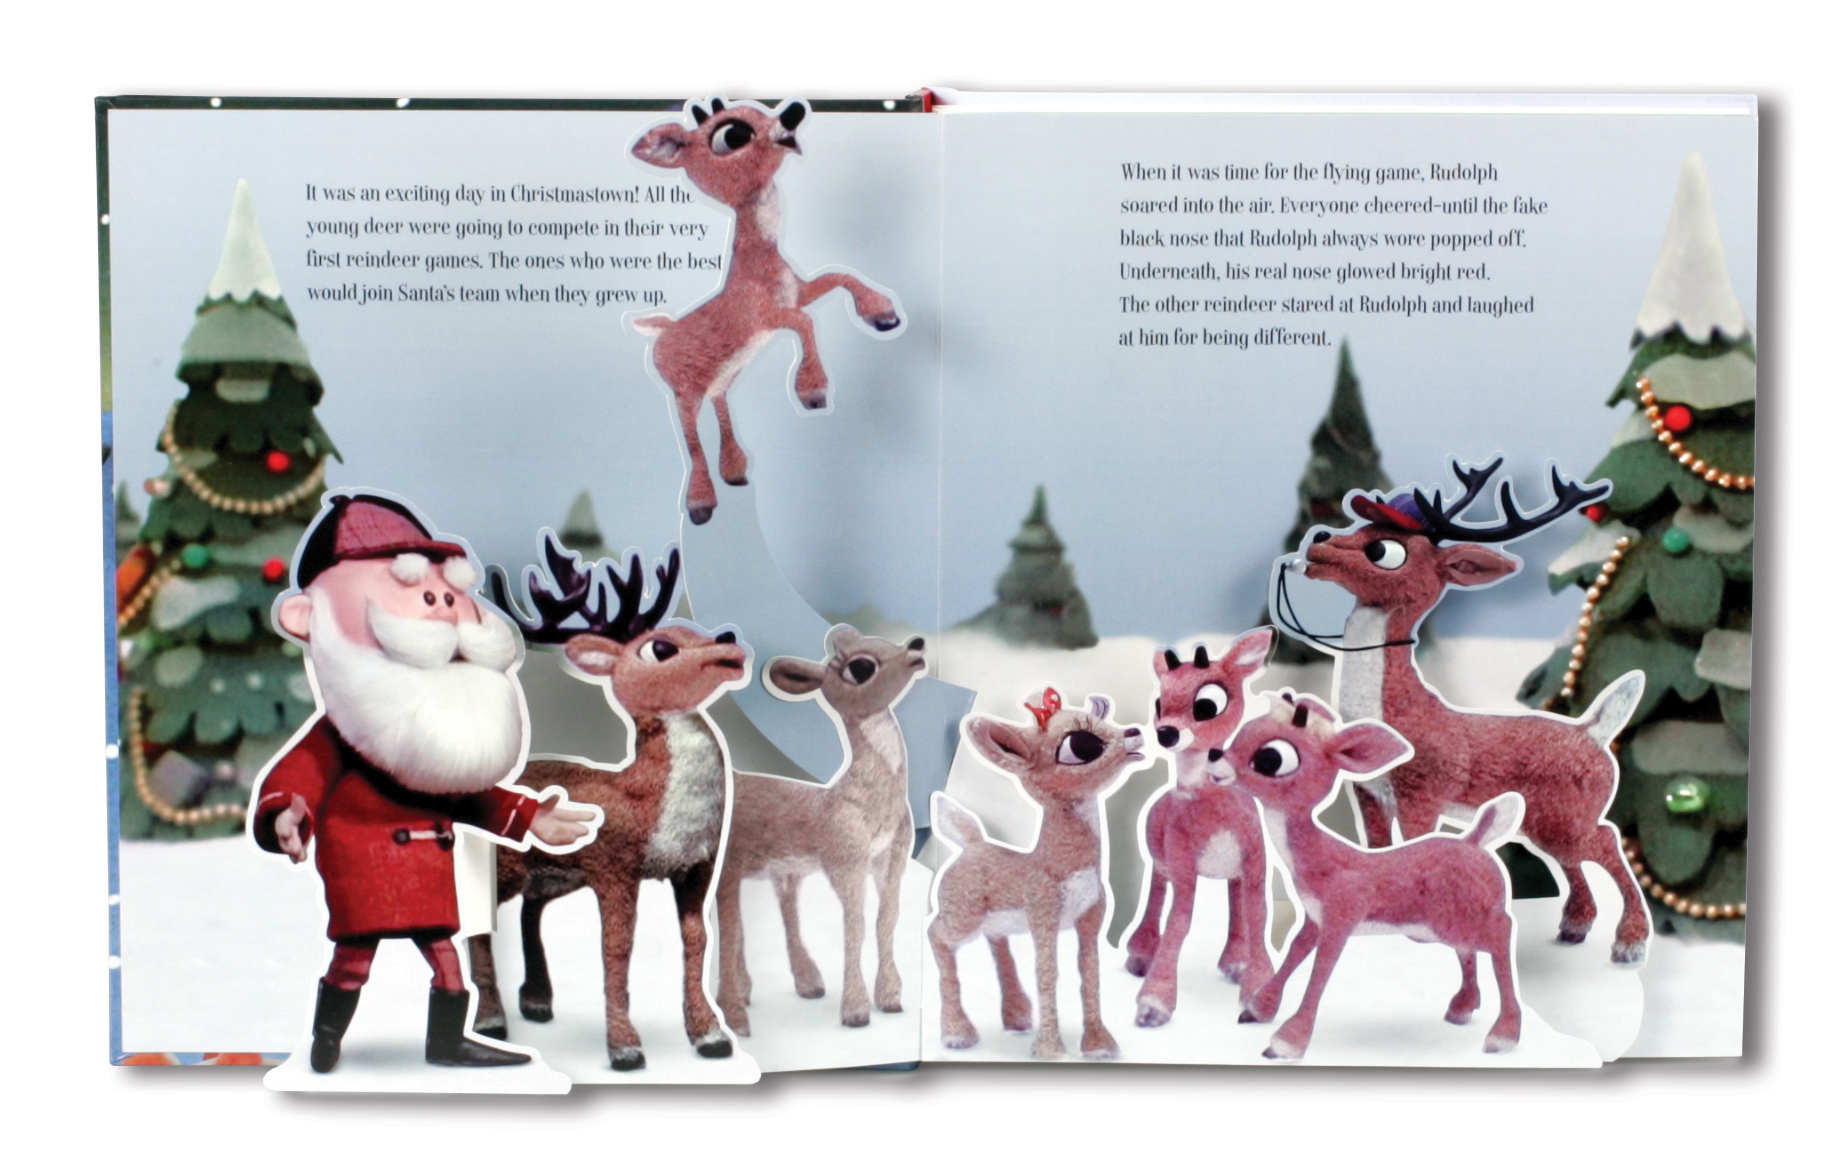 Rudolph the Red-Nosed Reindeer Pop-Up : The Childrens Book Review1828 x 1162